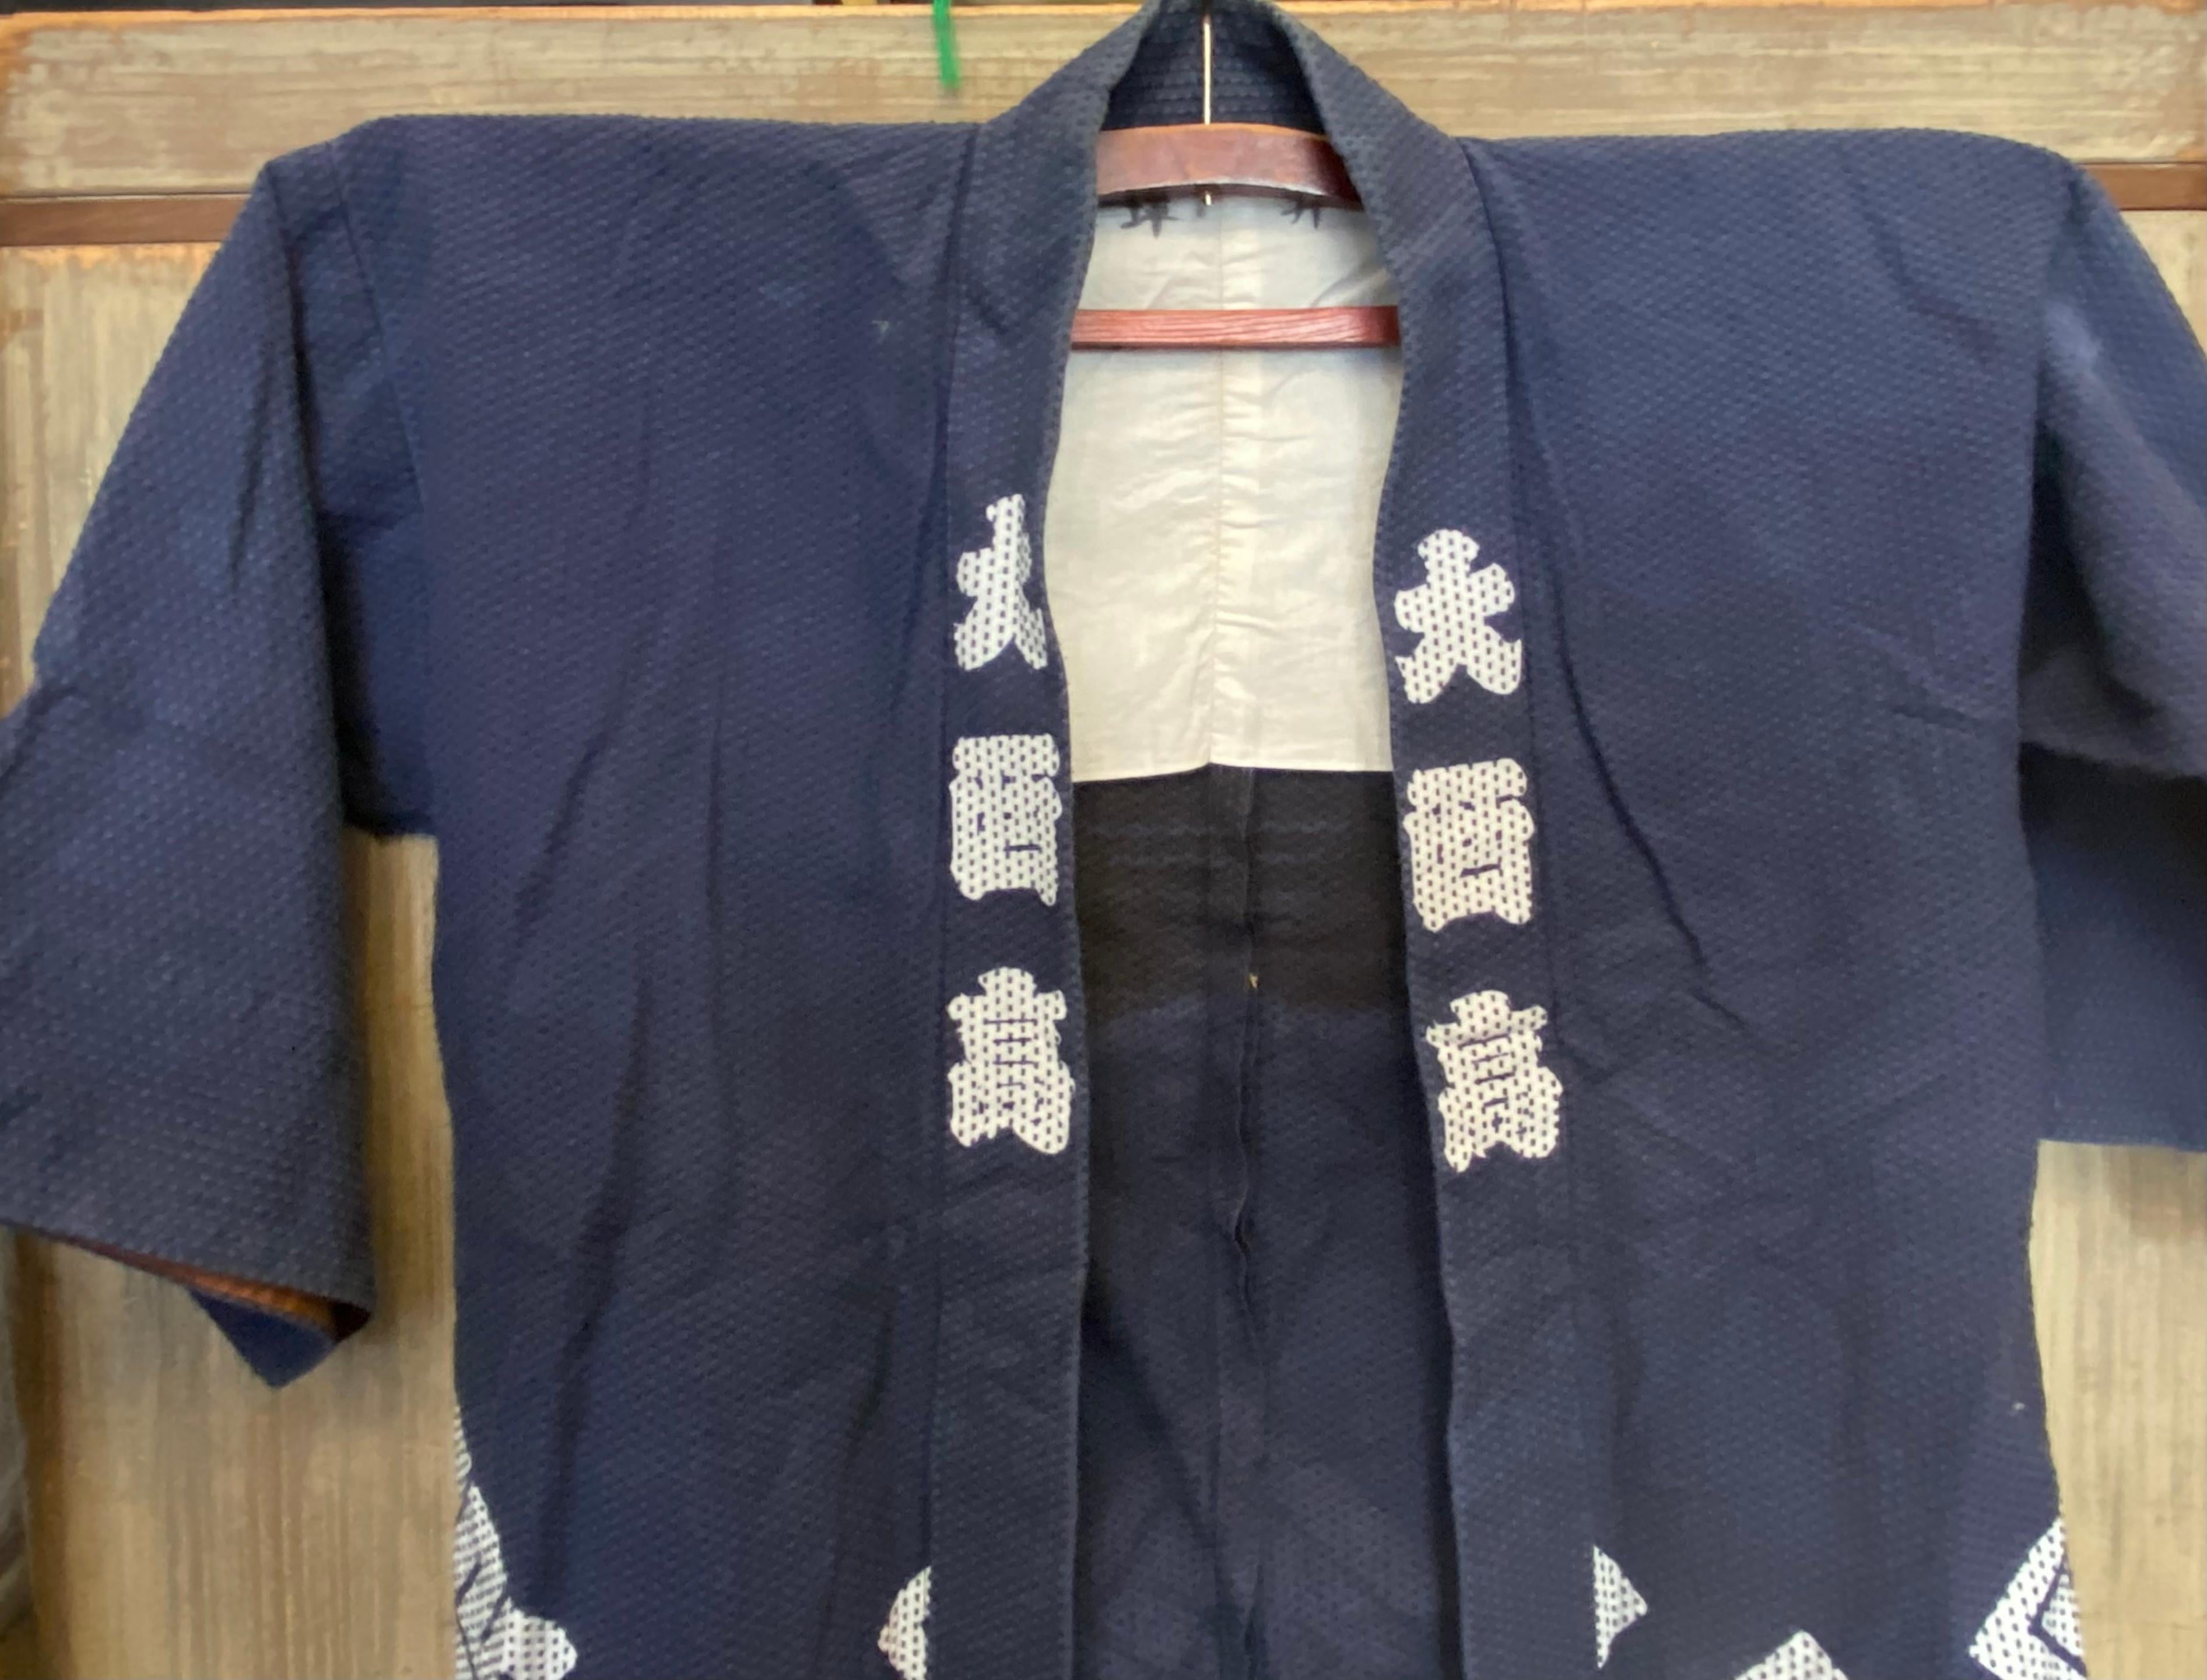 Hanten is a type of traditional Japanese garment that is often referred to as a 